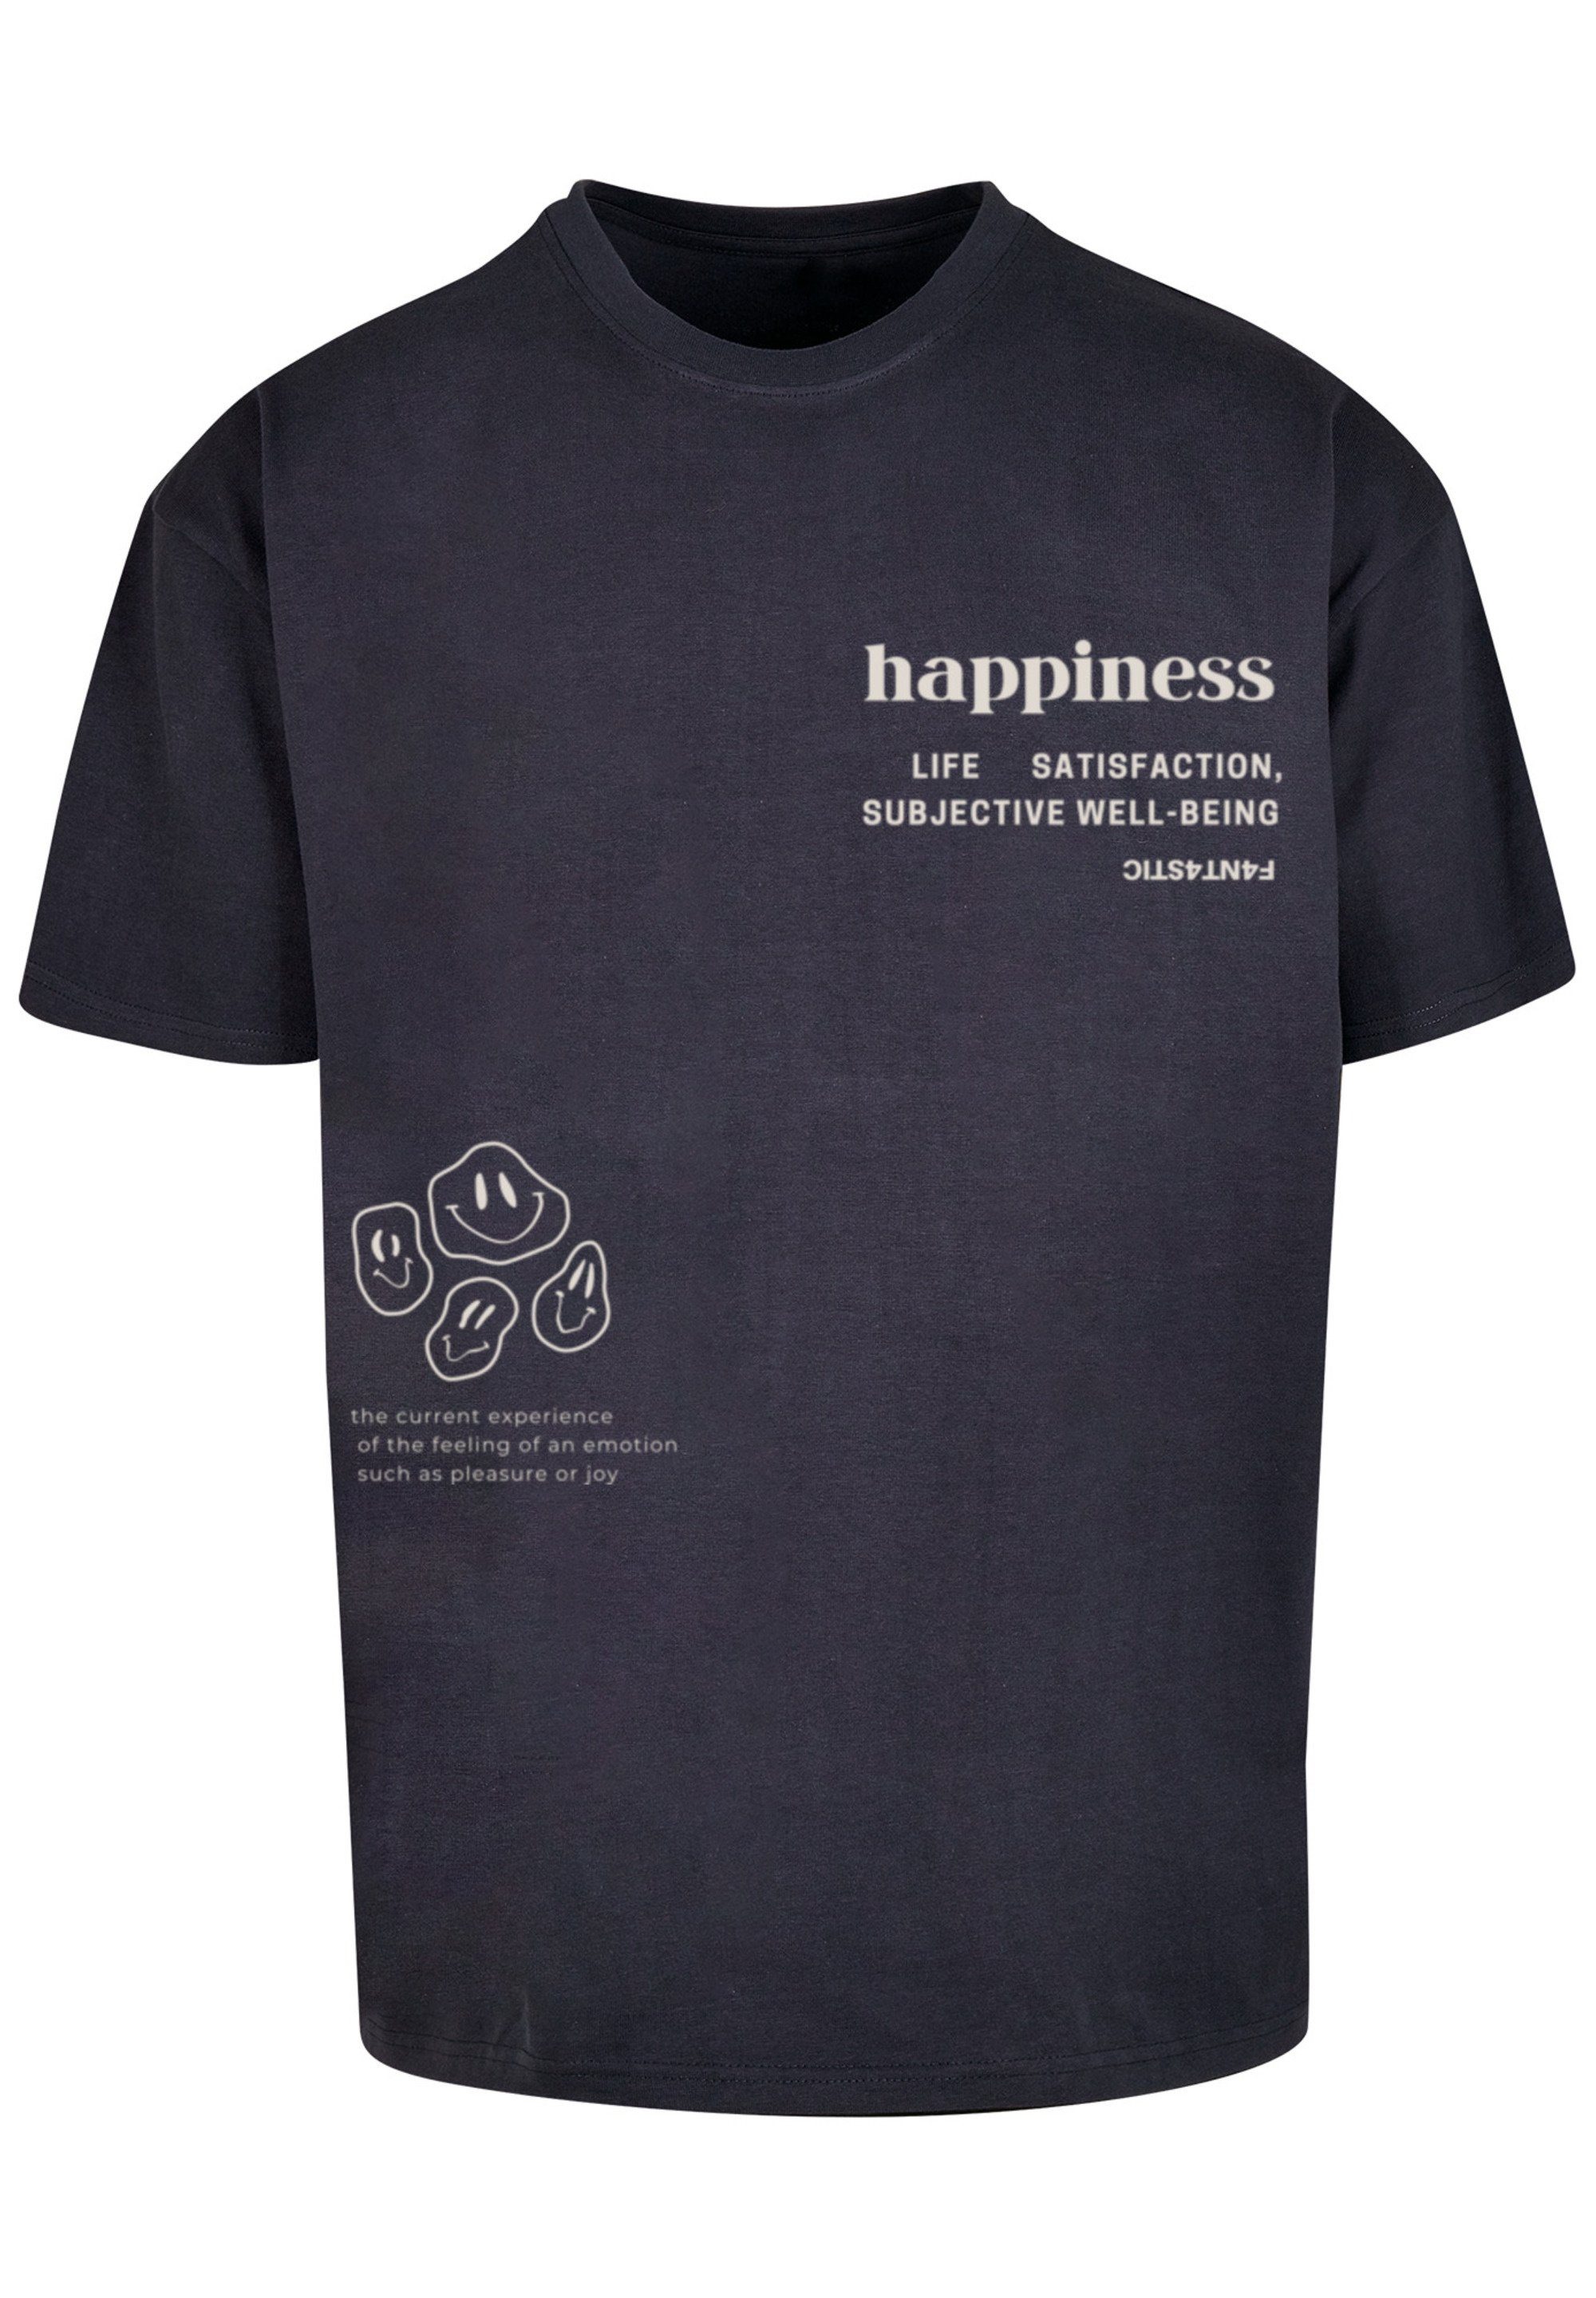 TEE OVERSIZE T-Shirt F4NT4STIC navy happiness Print